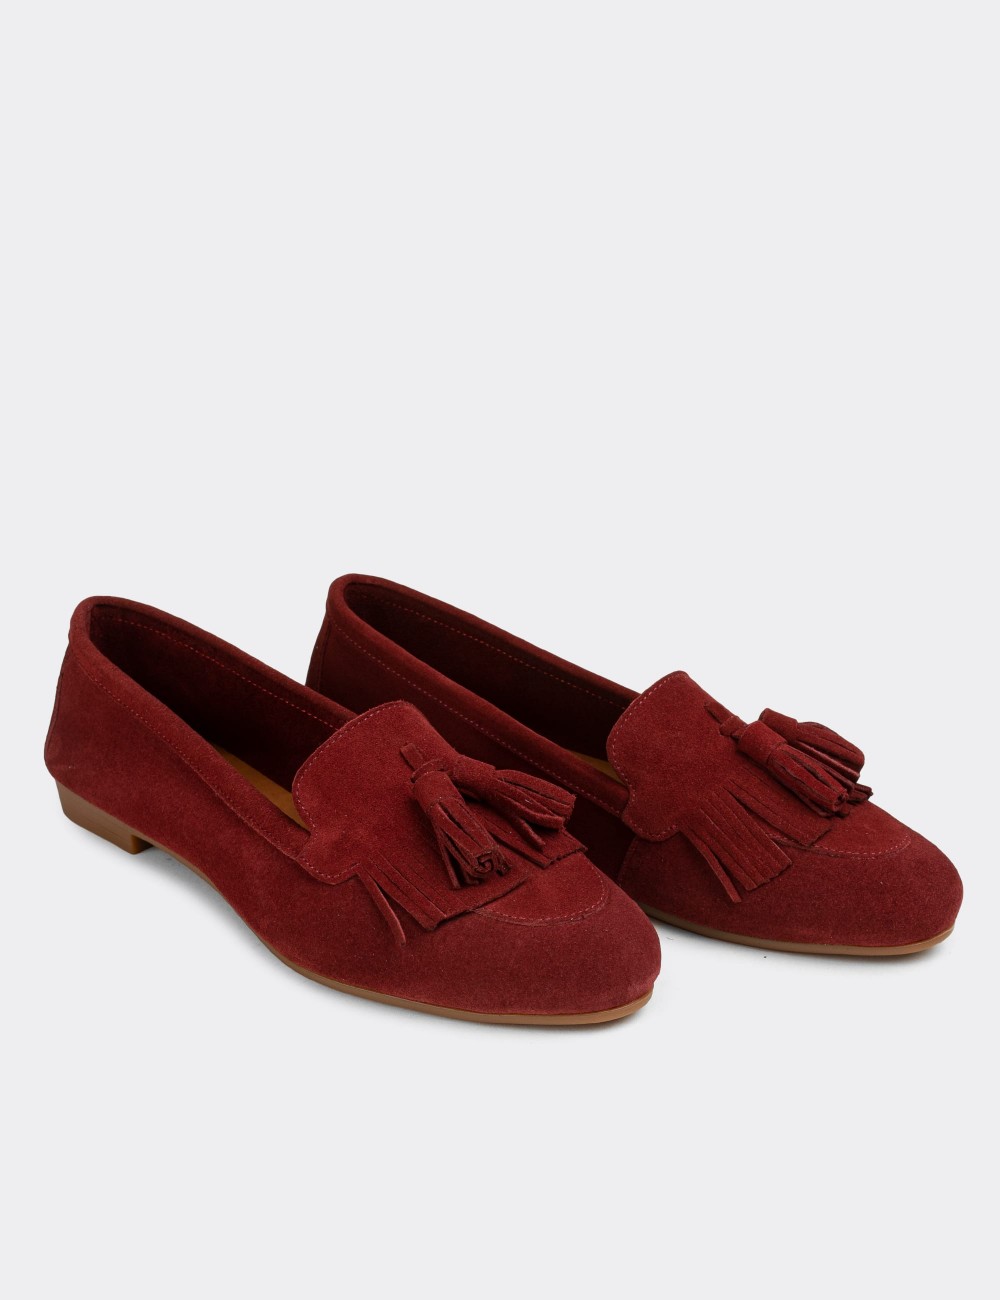 Burgundy Suede Leather Loafers  - E3203ZBRDC01